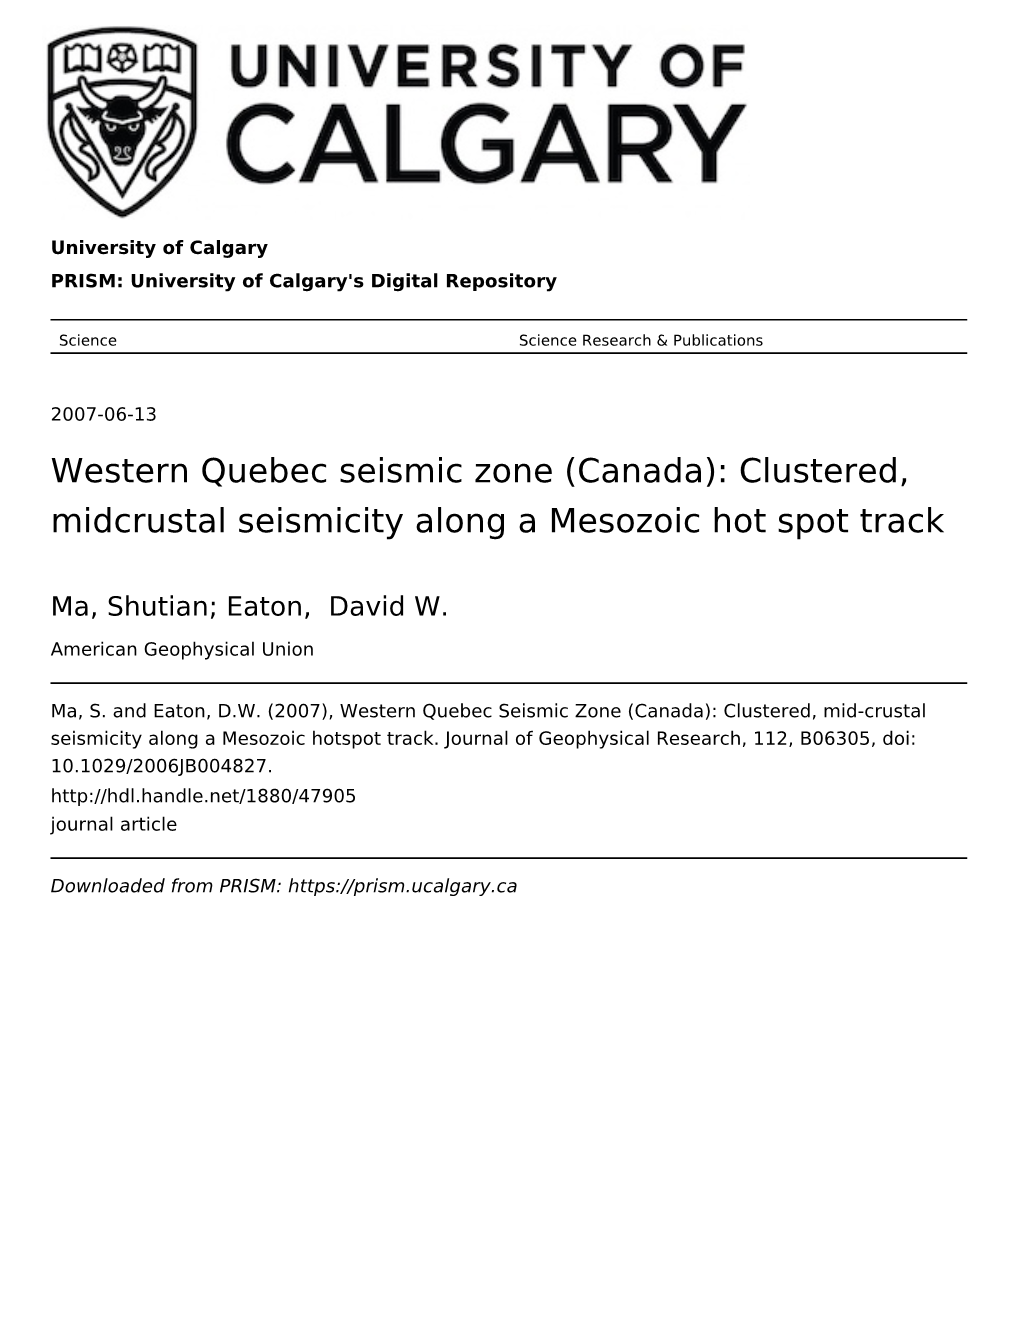 Western Quebec Seismic Zone (Canada): Clustered, Midcrustal Seismicity Along a Mesozoic Hot Spot Track